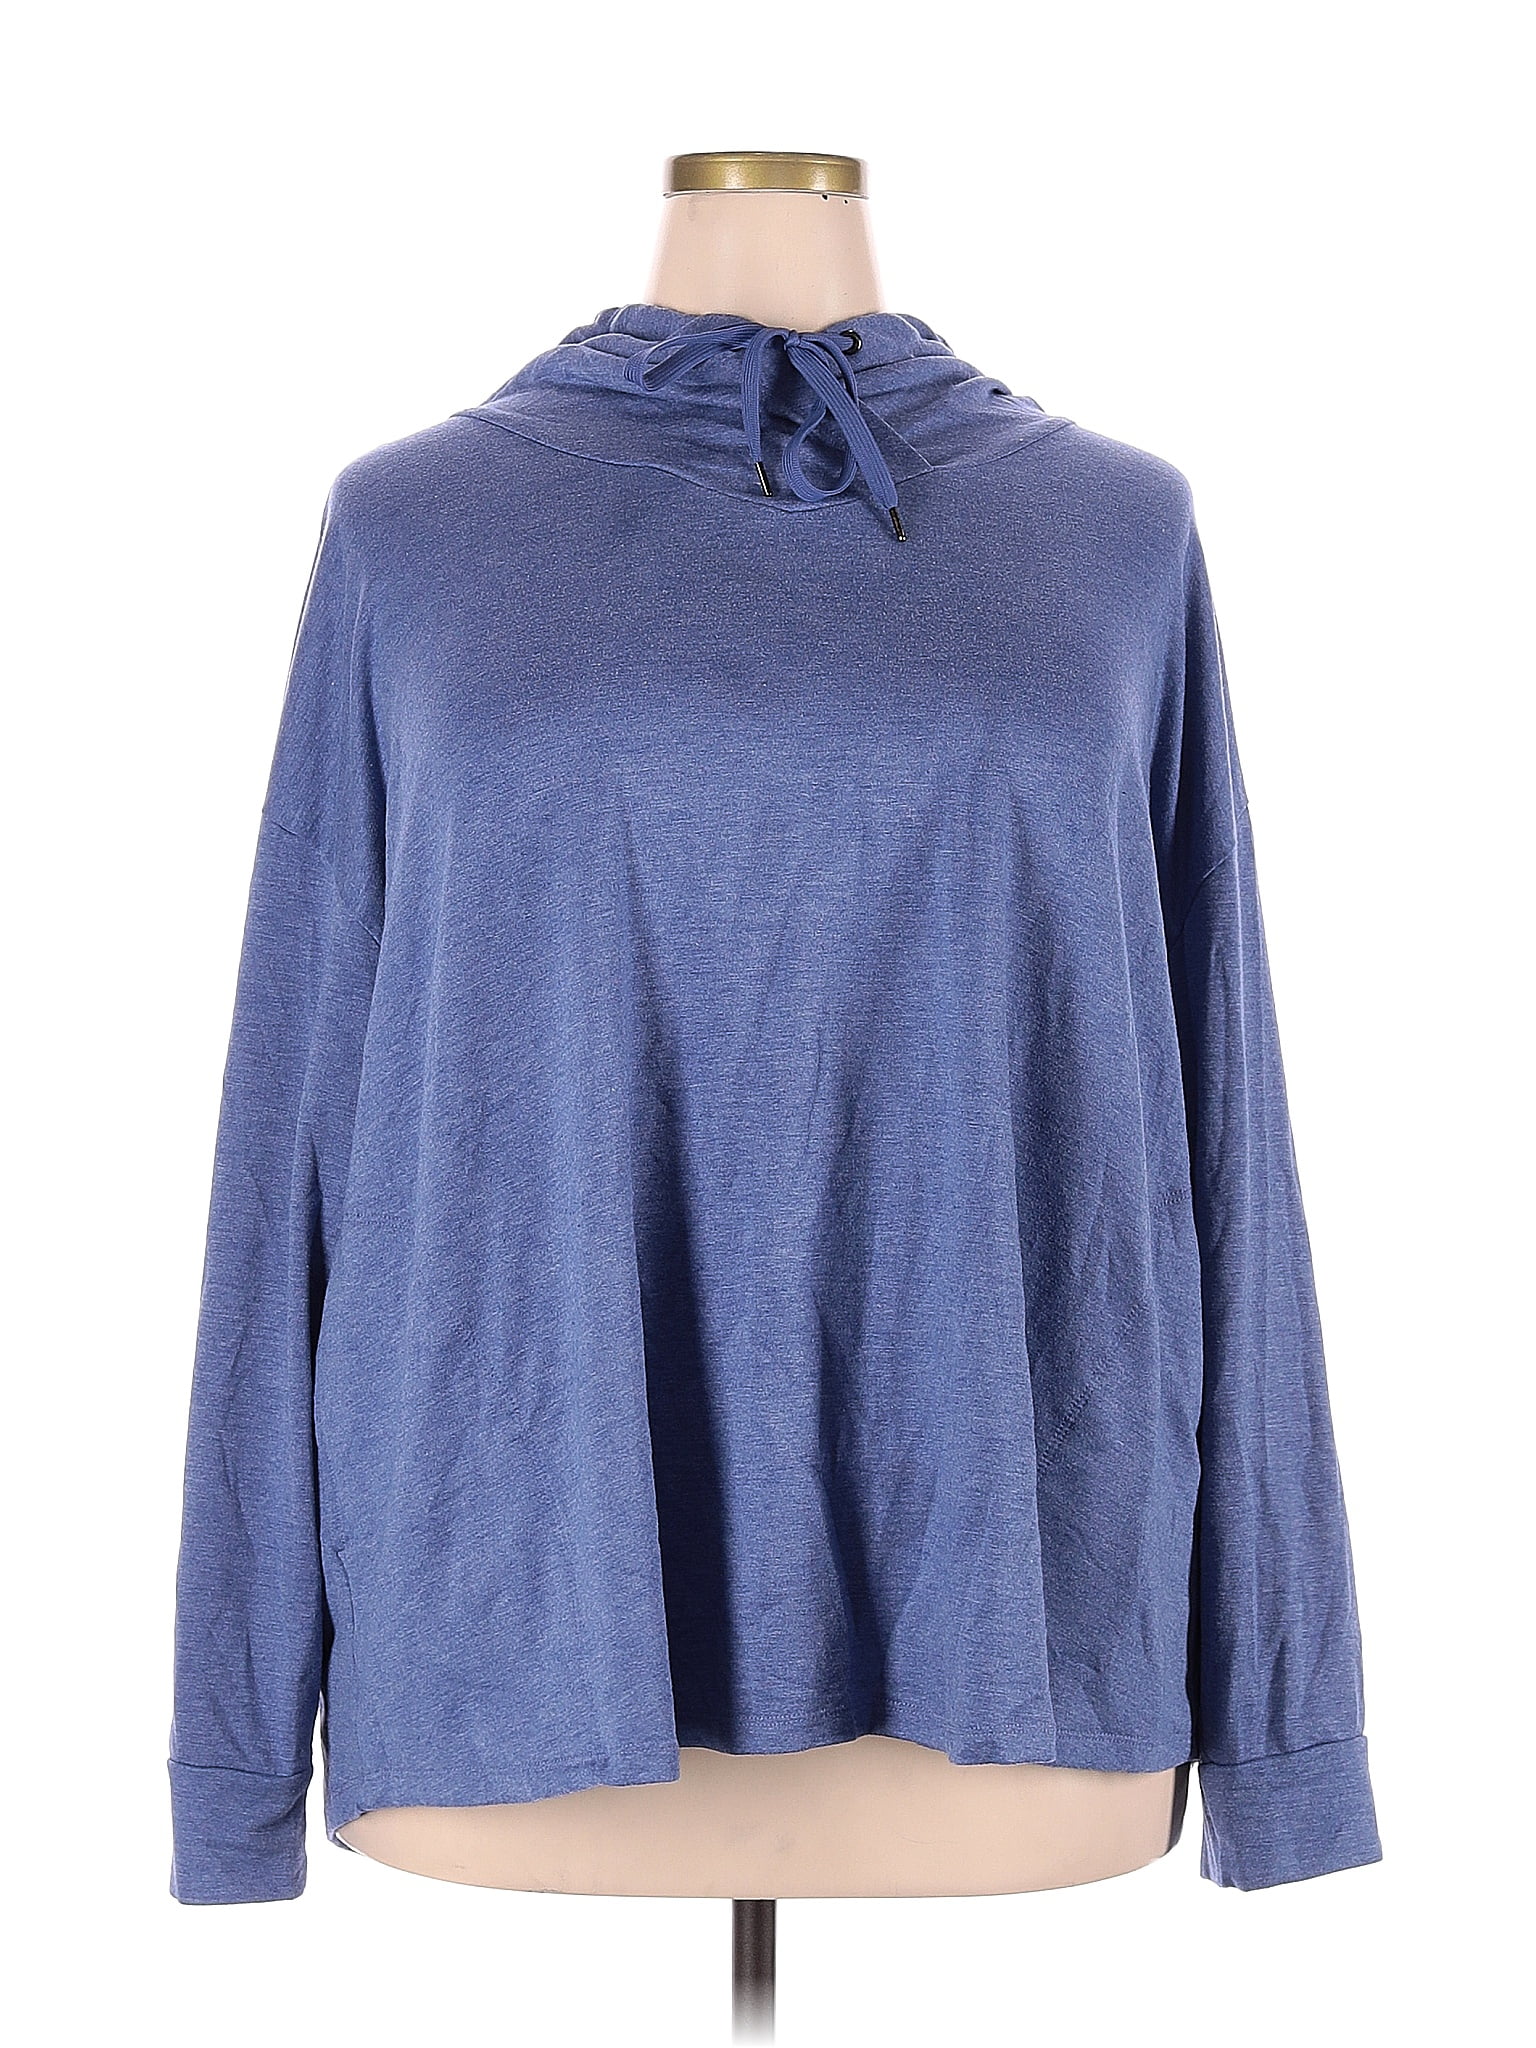 St. John's Bay Color Block Blue Pullover Sweater Size 3X (Plus) - 62% off